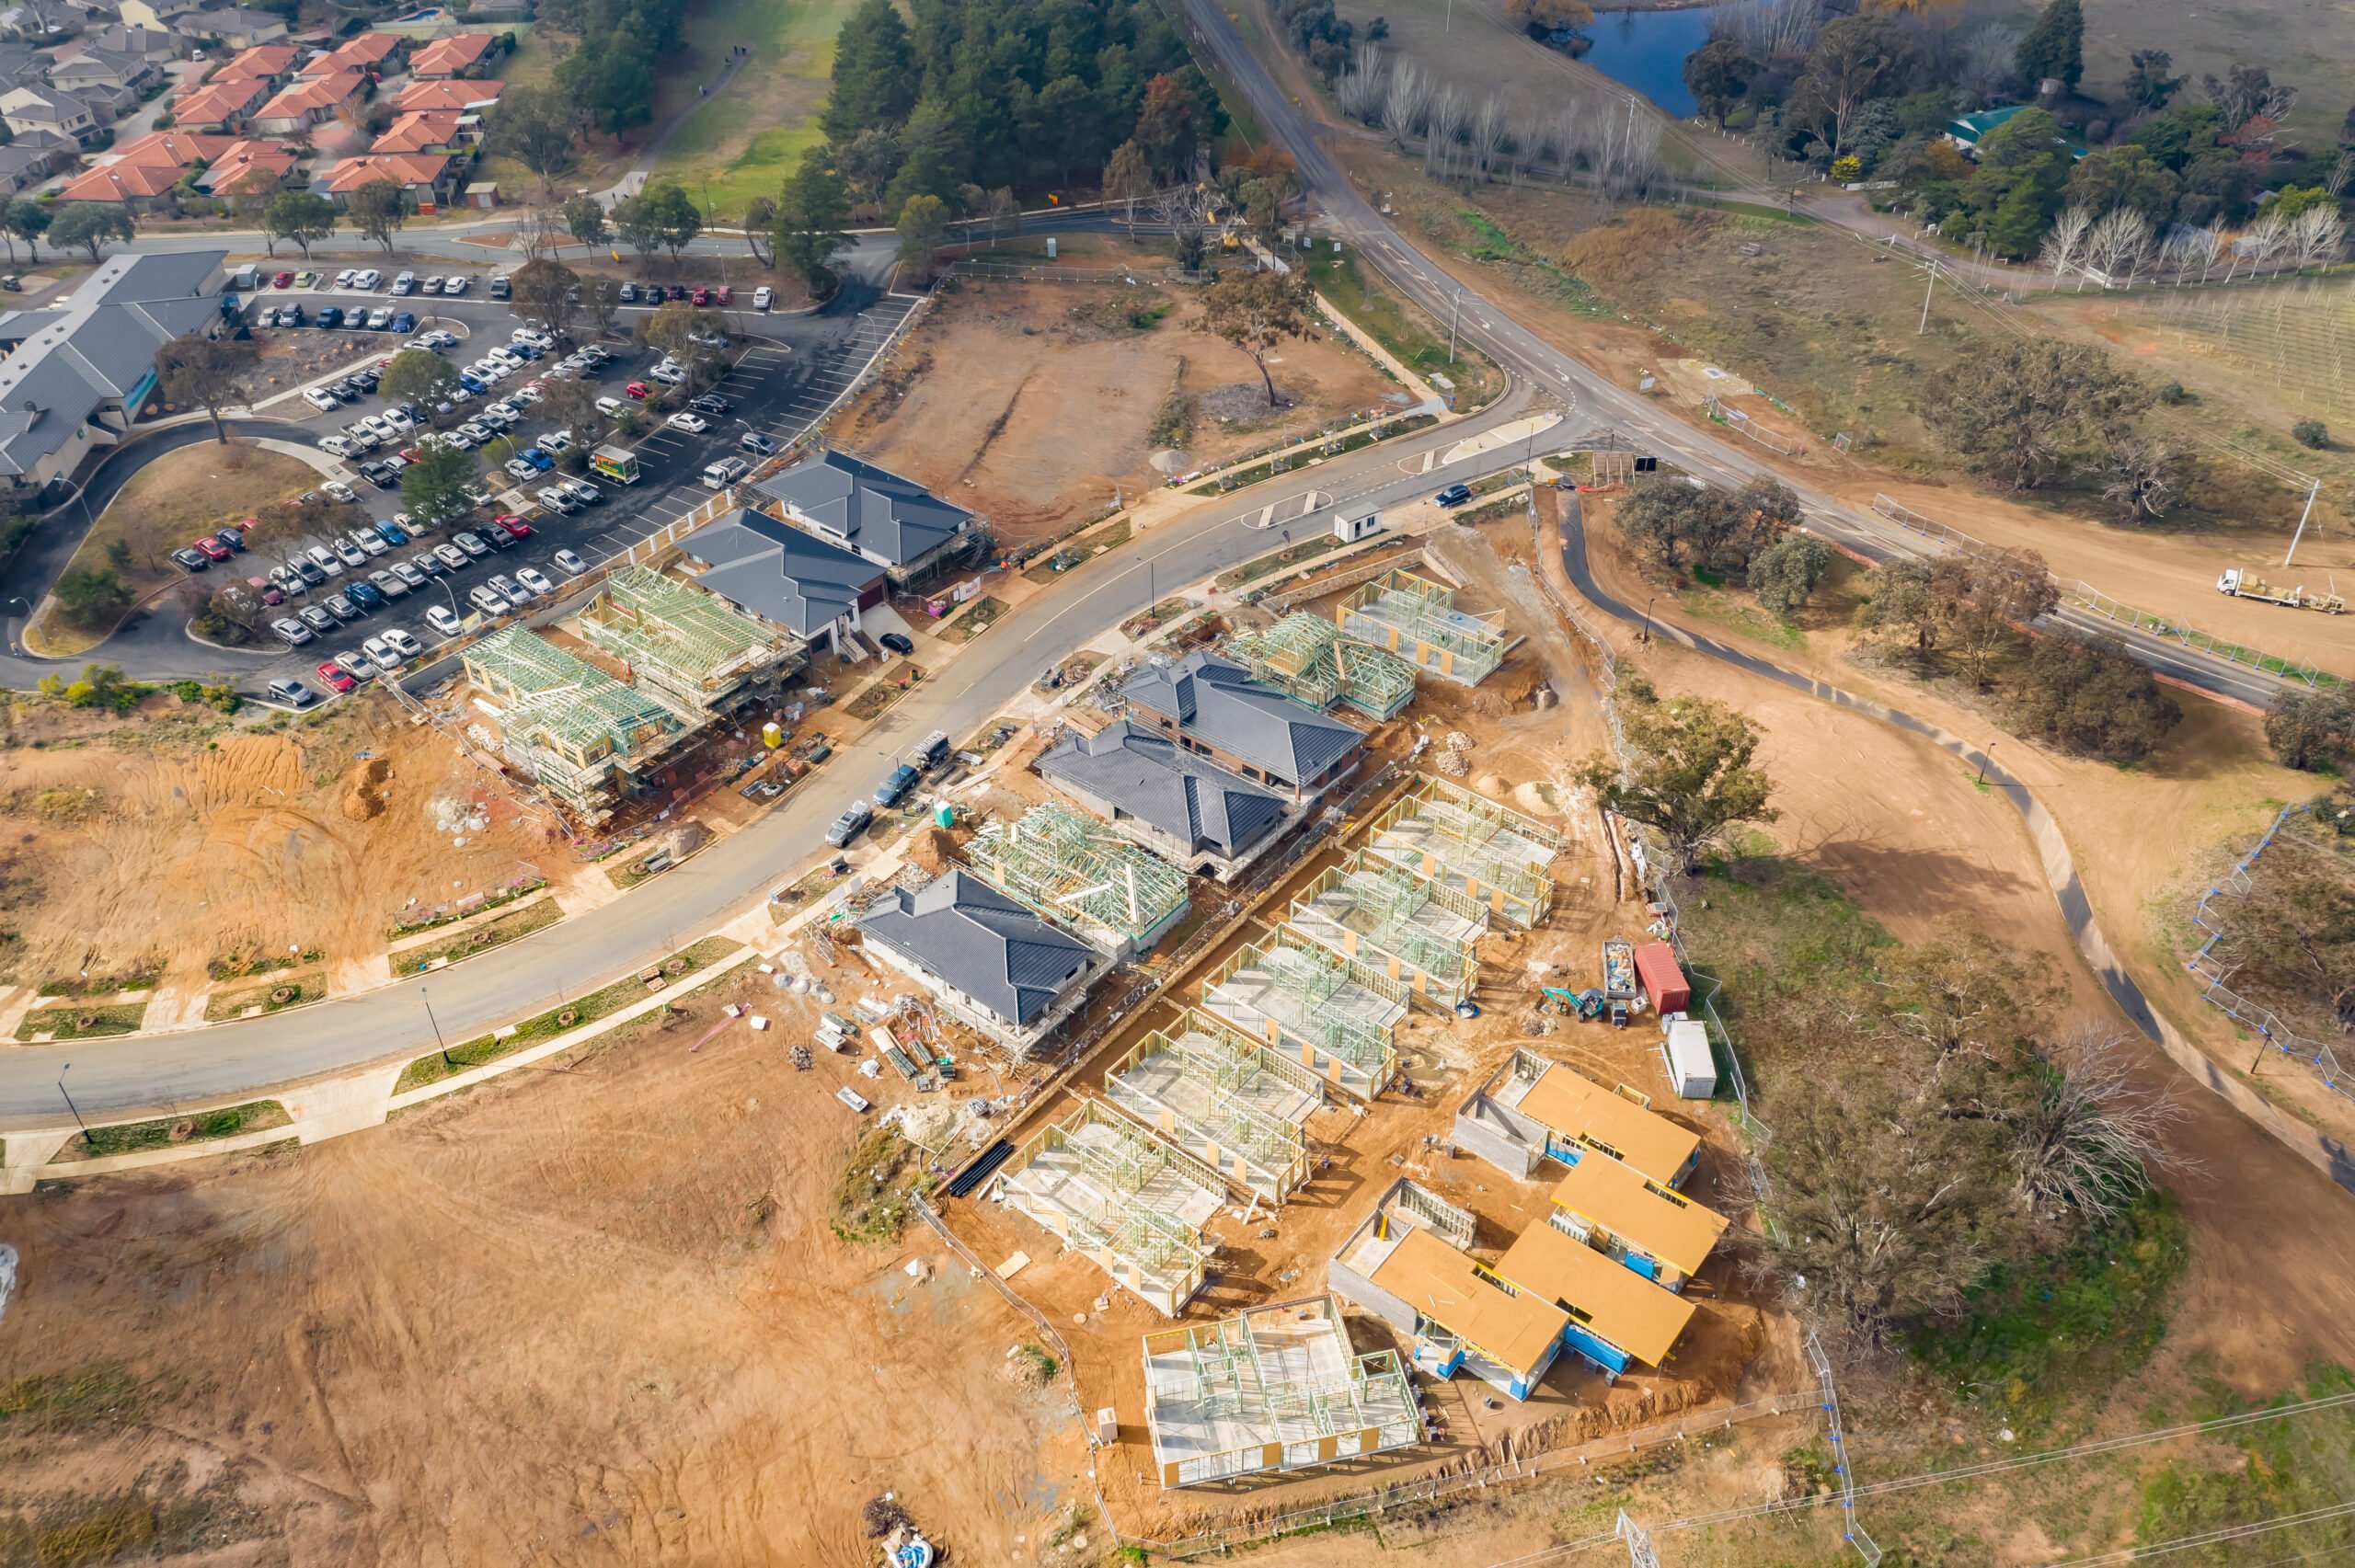 Aerial view of housing development and construction in a newly established suburb